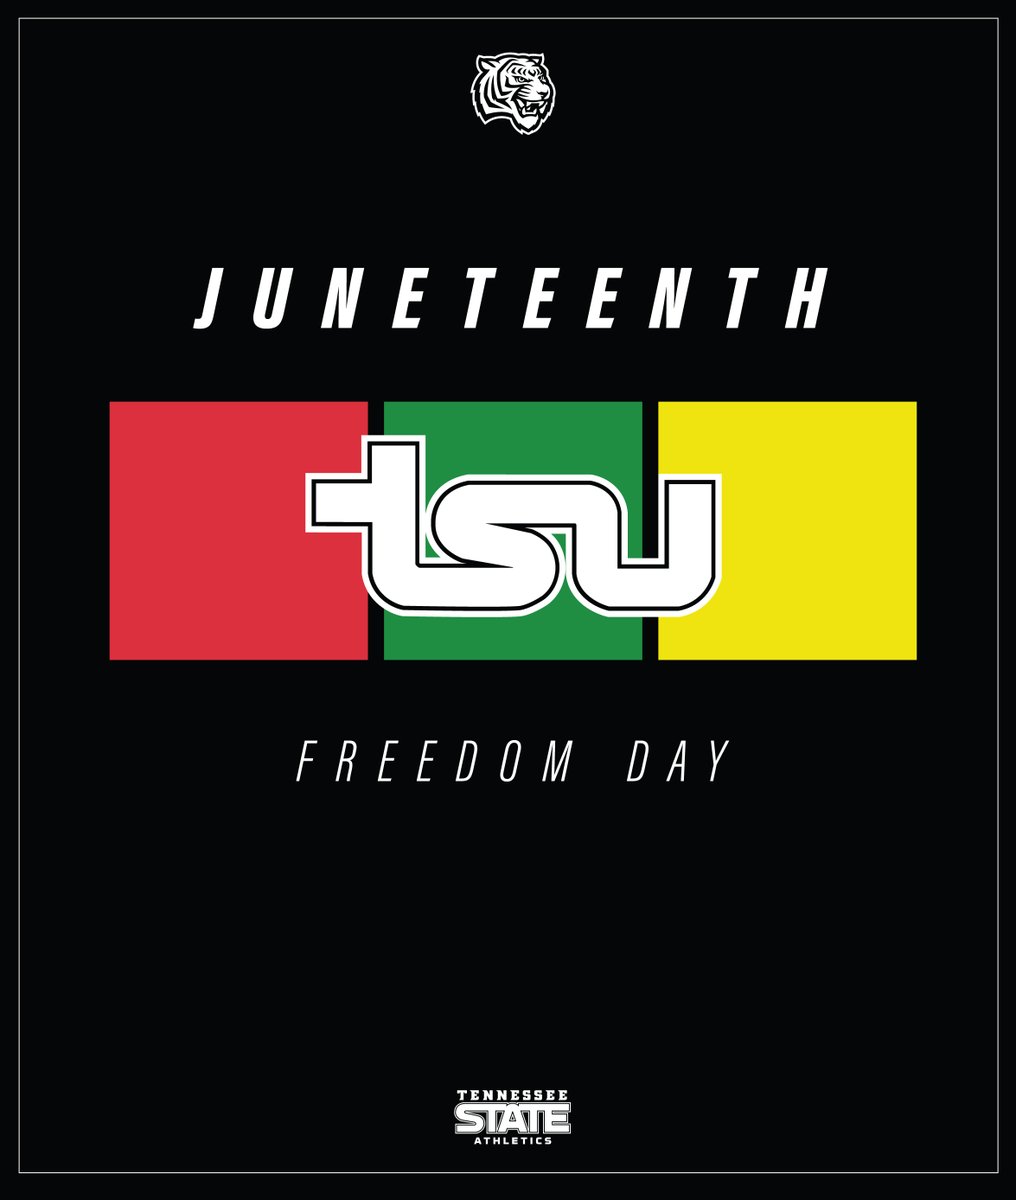 Happy Juneteenth! TSU Athletics stands with the nation in celebrating freedom and equality on this significant day. We honor the historic importance of Juneteenth and reaffirm our commitment to progress and inclusivity. 🔴🟢🟡 #RoarCity x #GoBigBlue